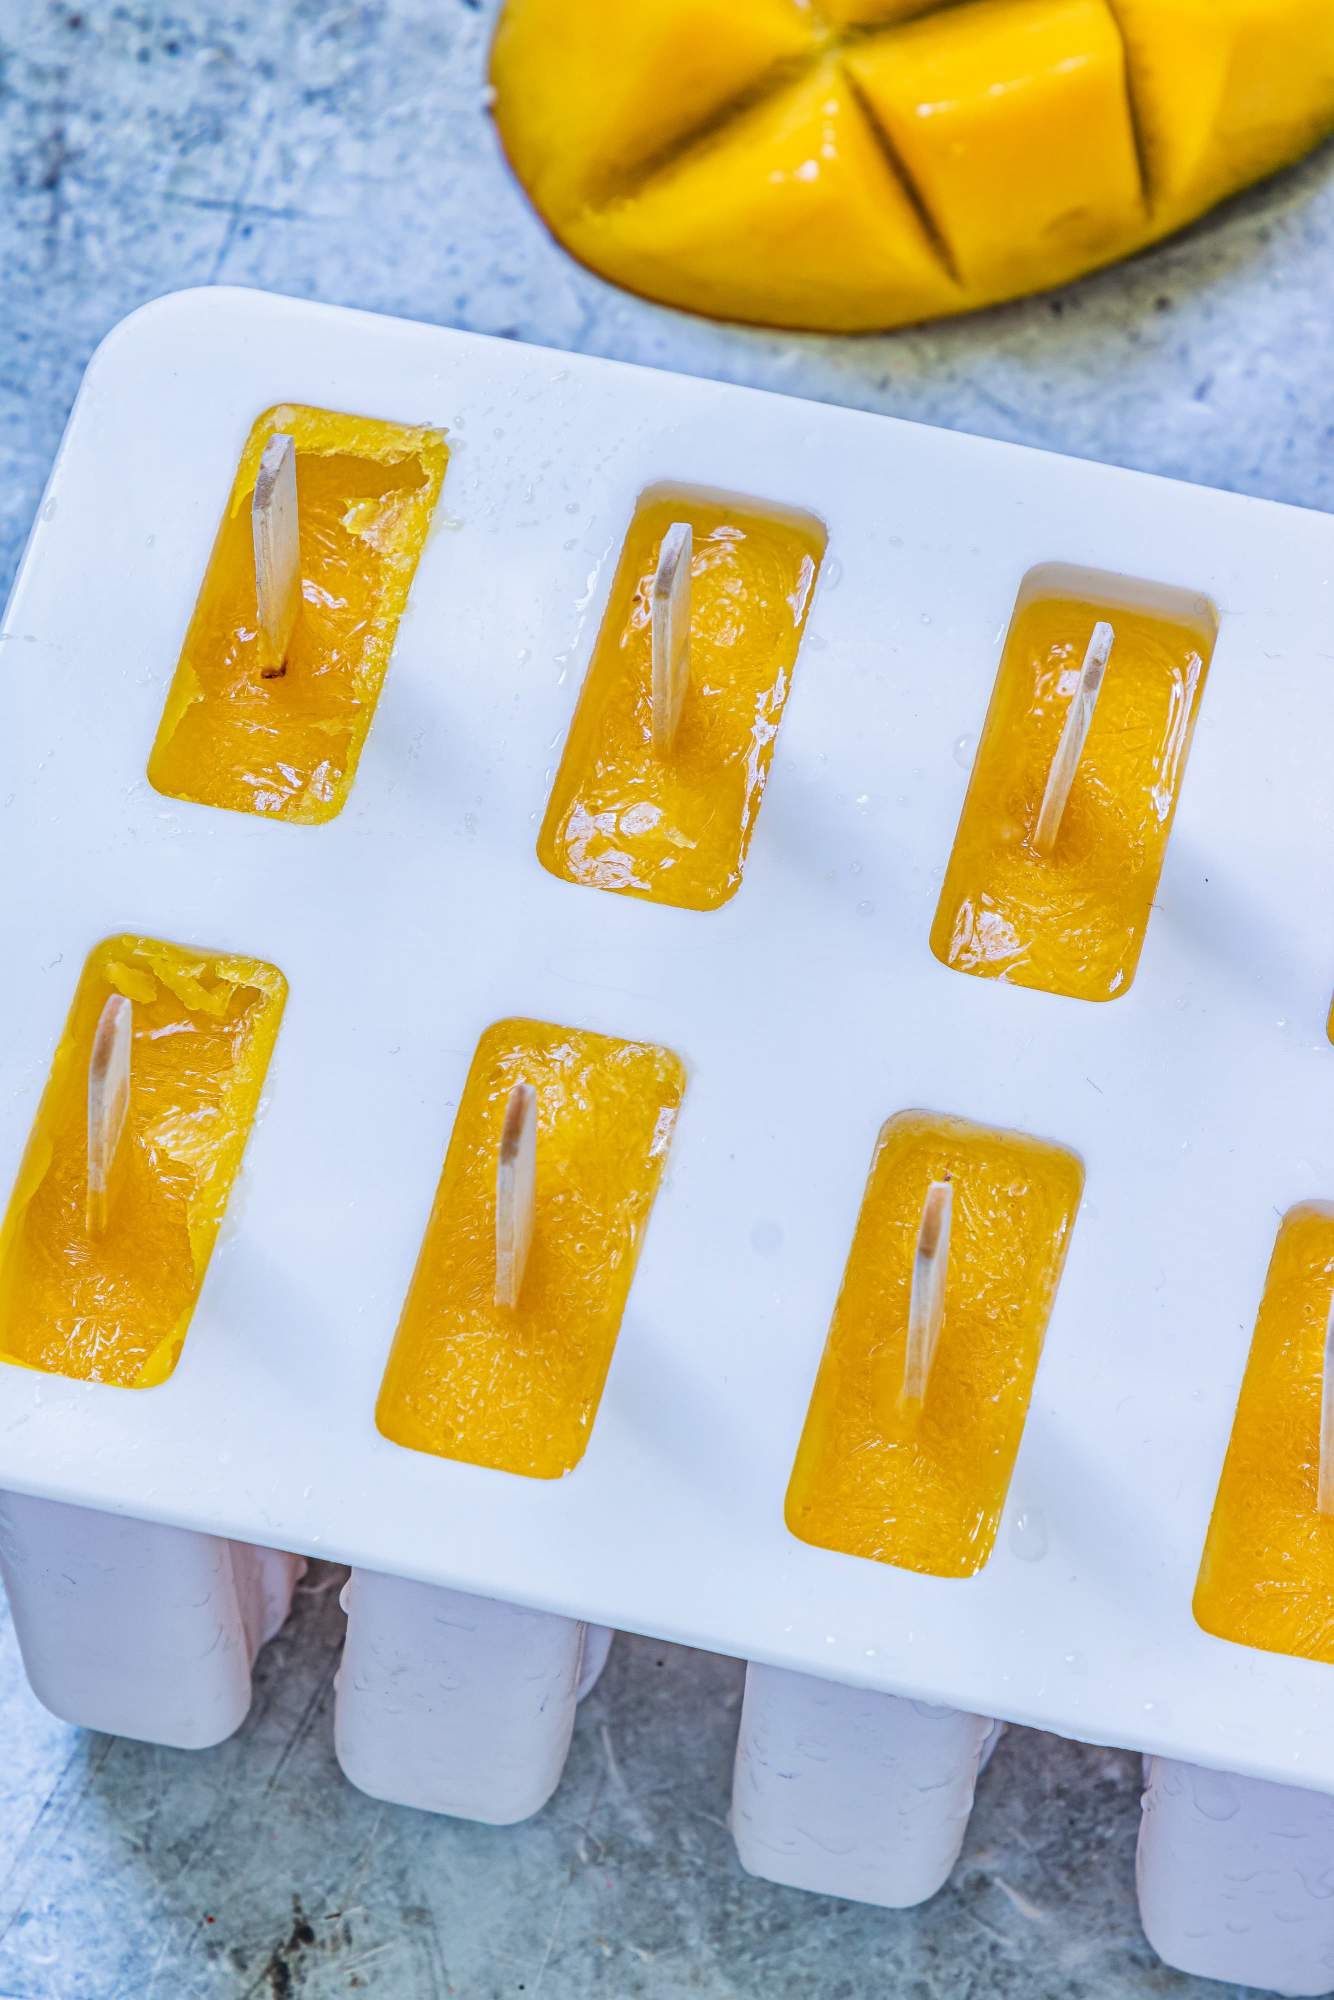 Popsicle molds filled with mango puree ready to be frozen into popsicles.